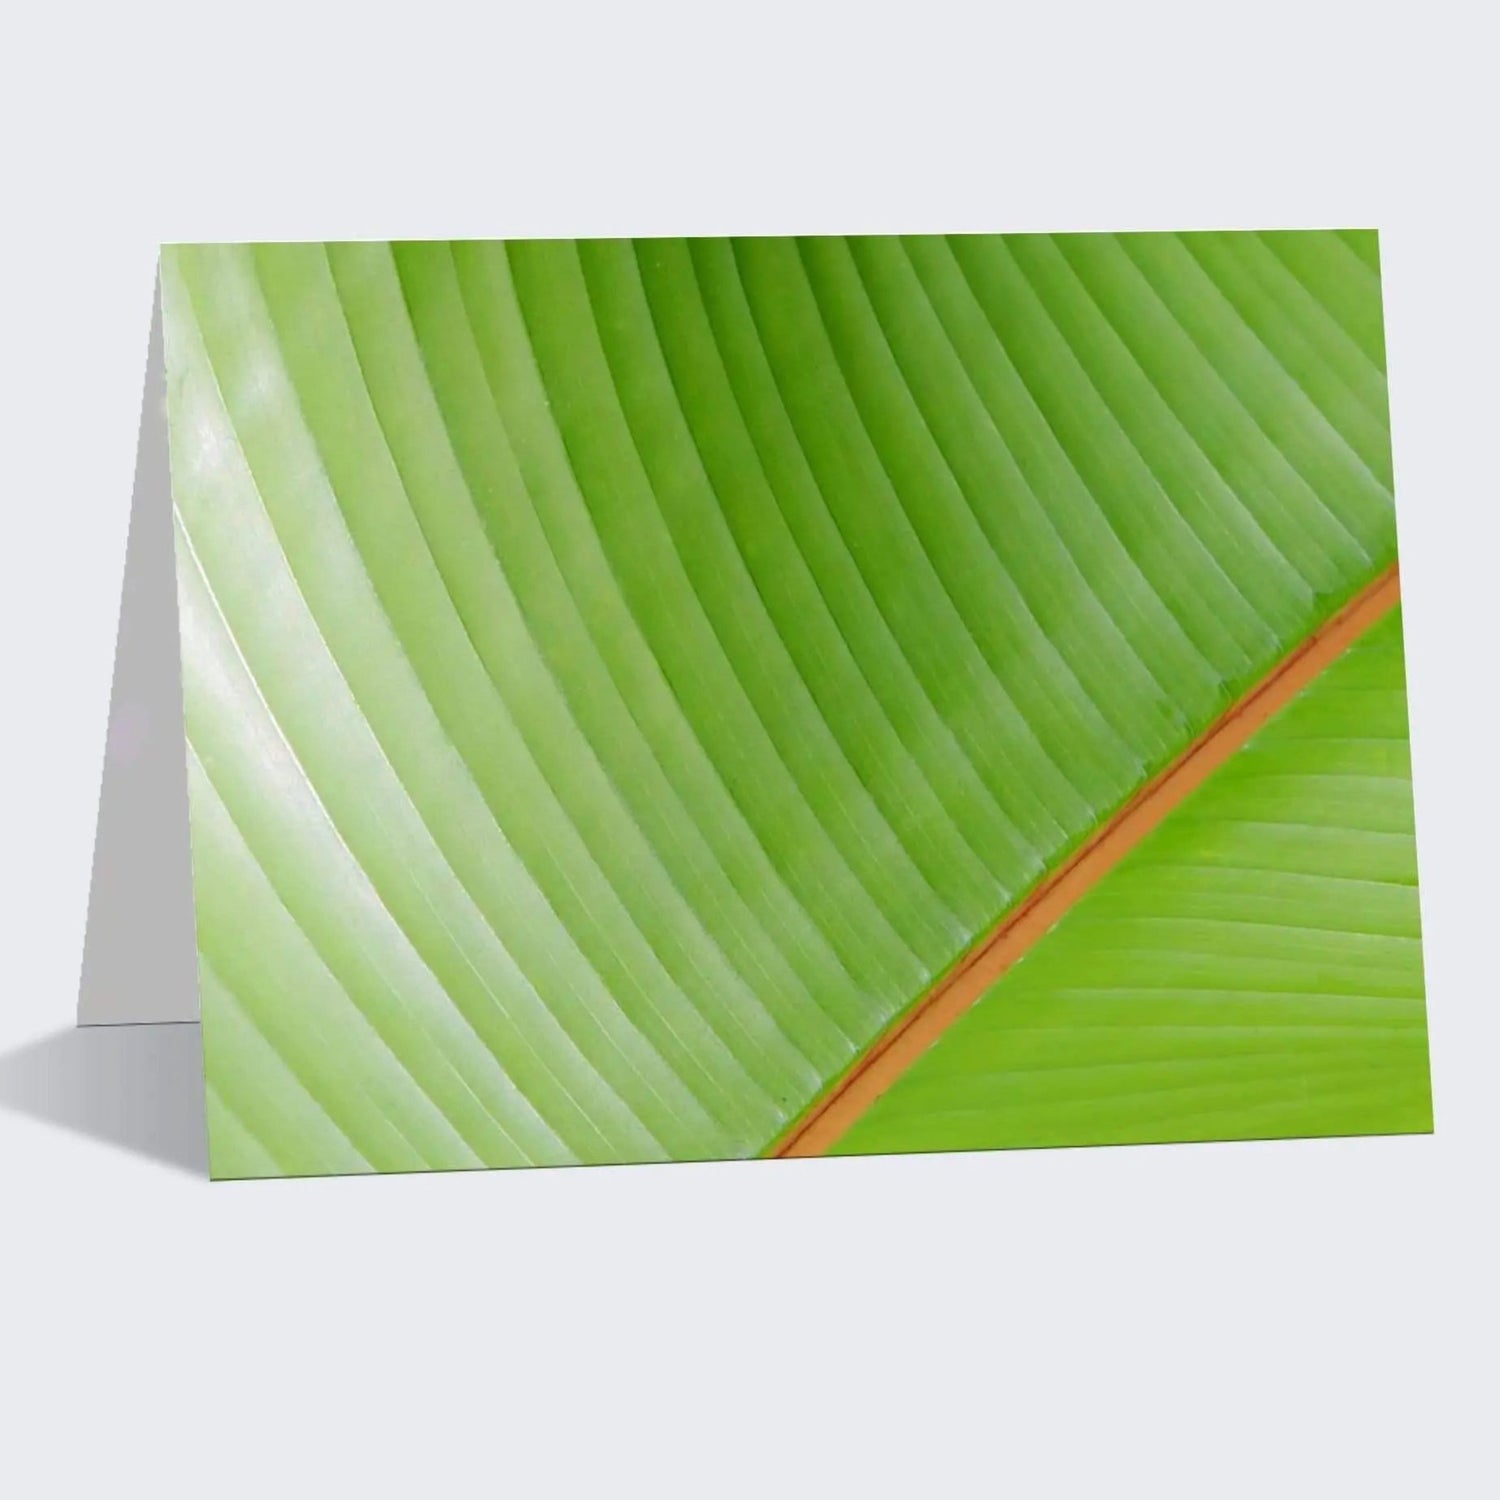 Banana leaf abstract fine art photography 5x7 linen note card customizable wording inside on large orders